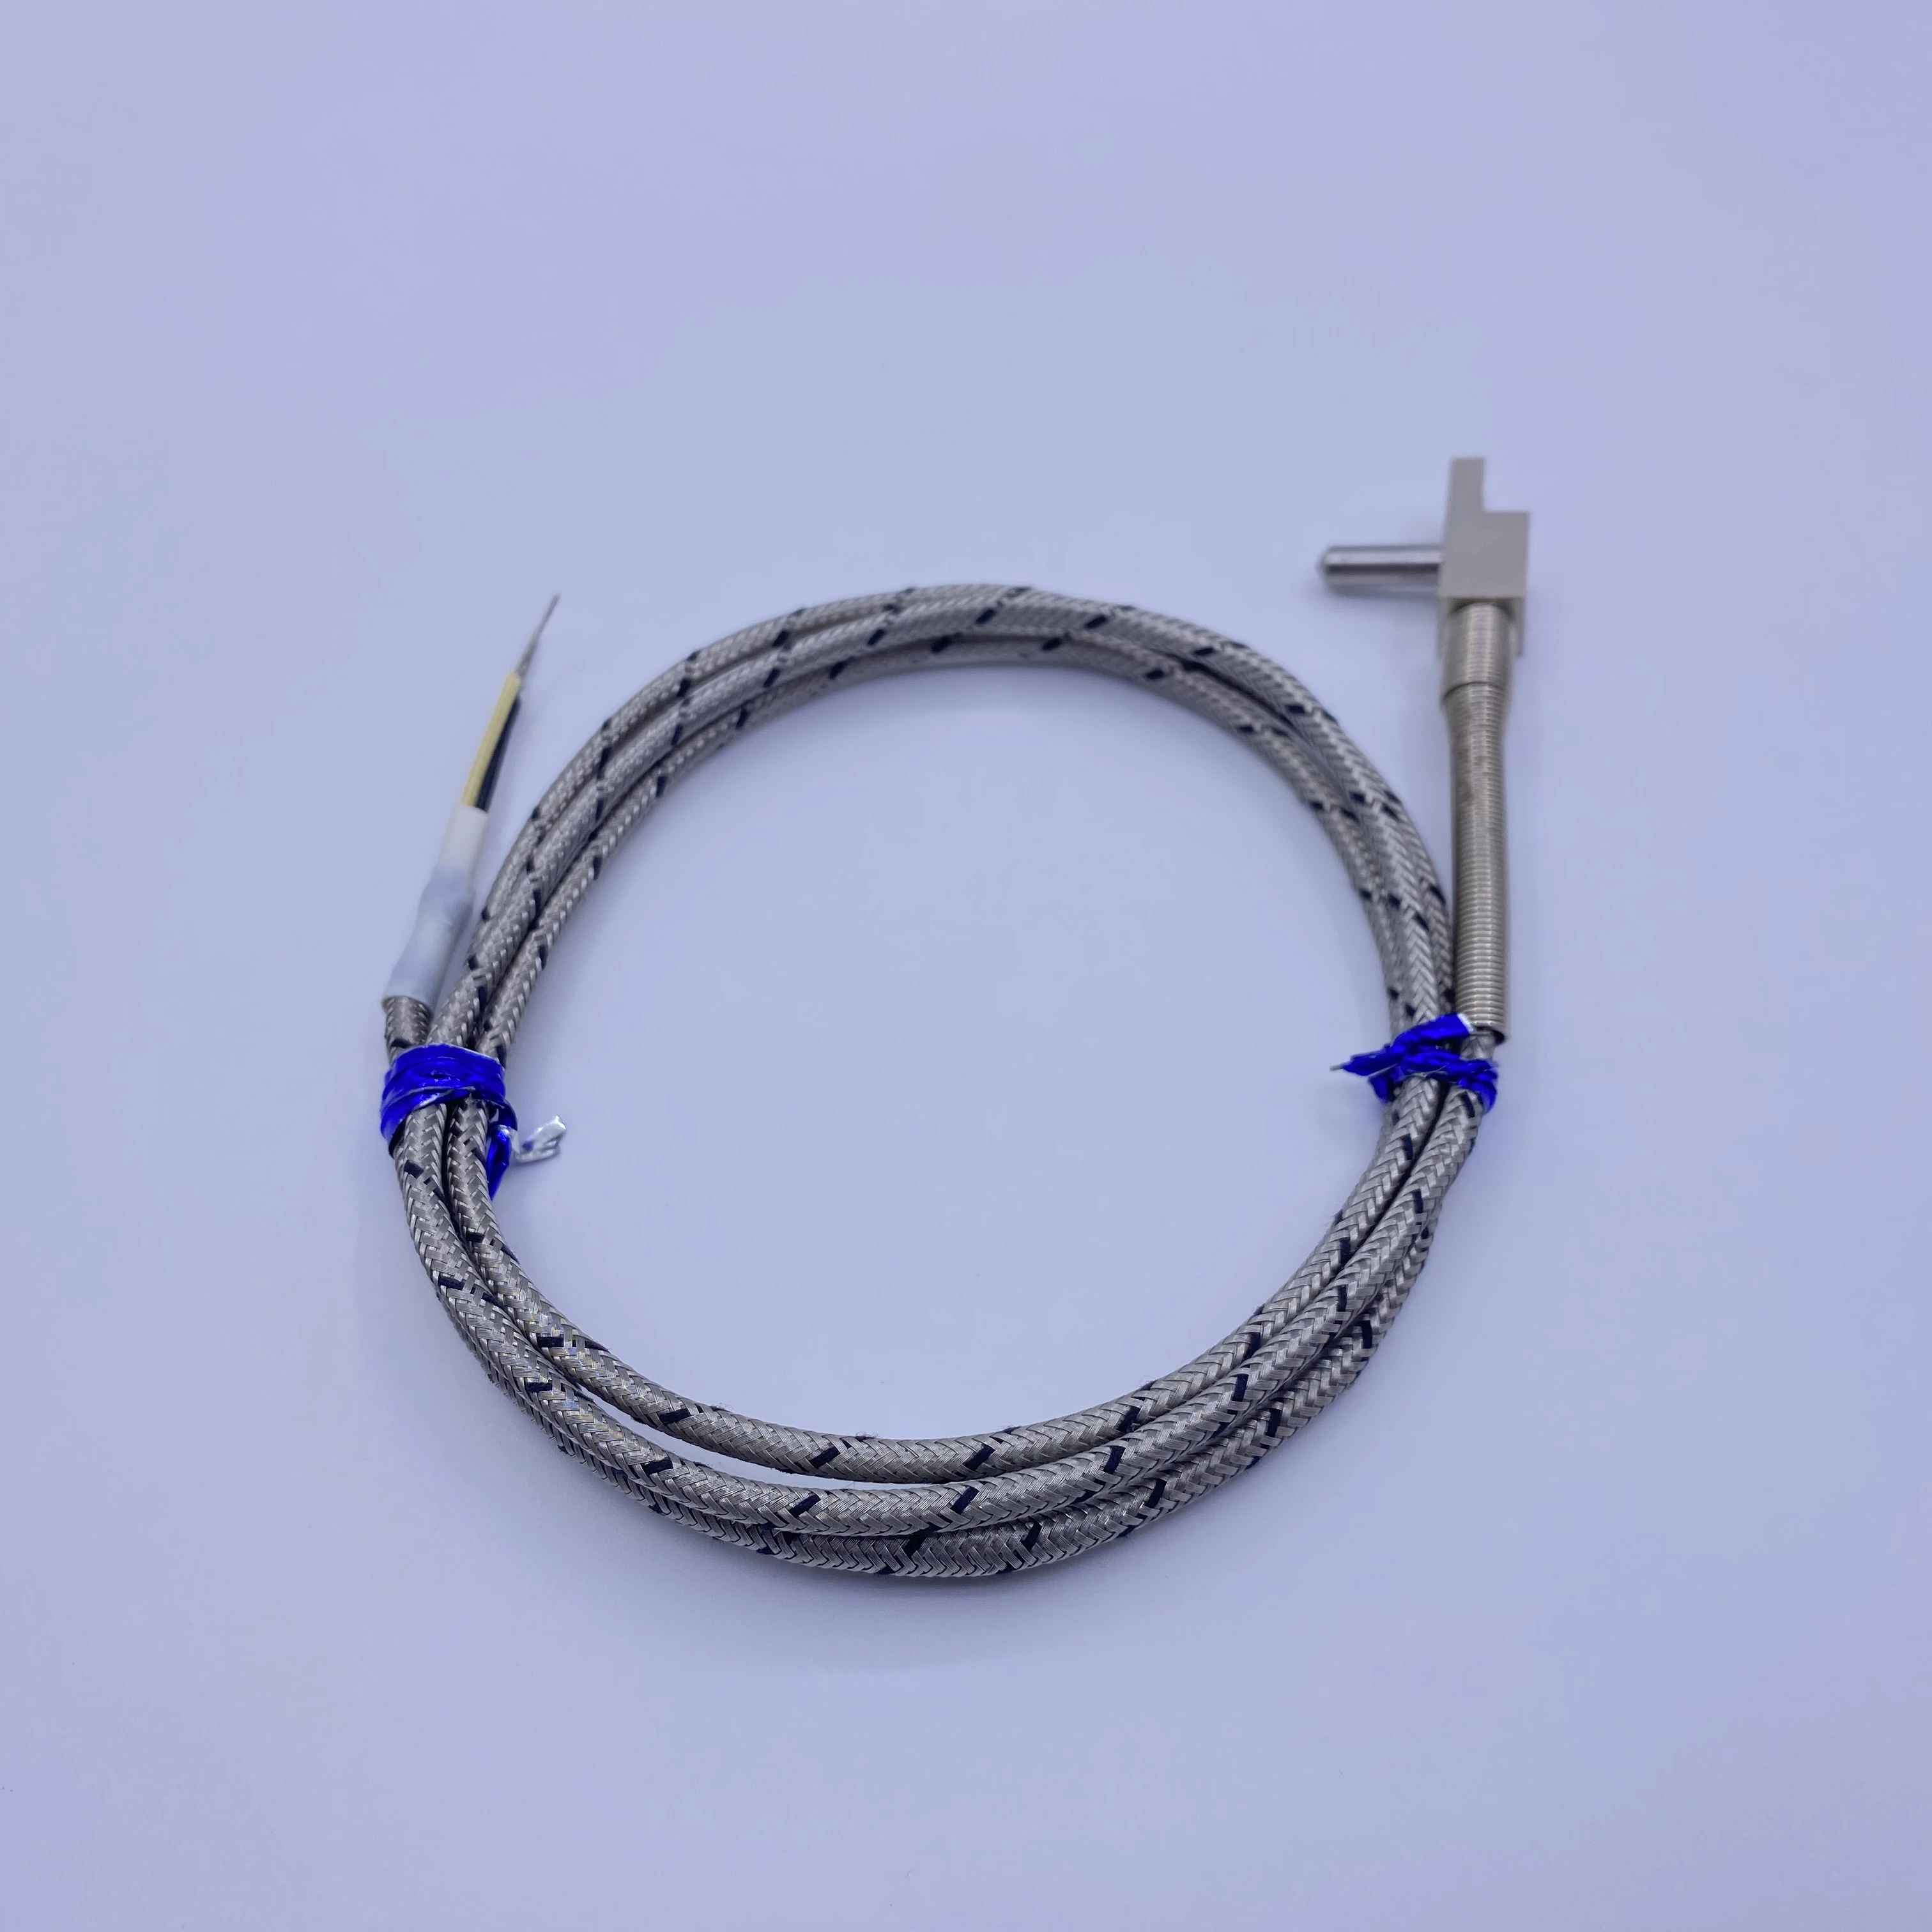 Manufacturer Quality Assurance Thermocouple Bare Wire Thermocouple Type K Hot Sale Universal Thermocouple